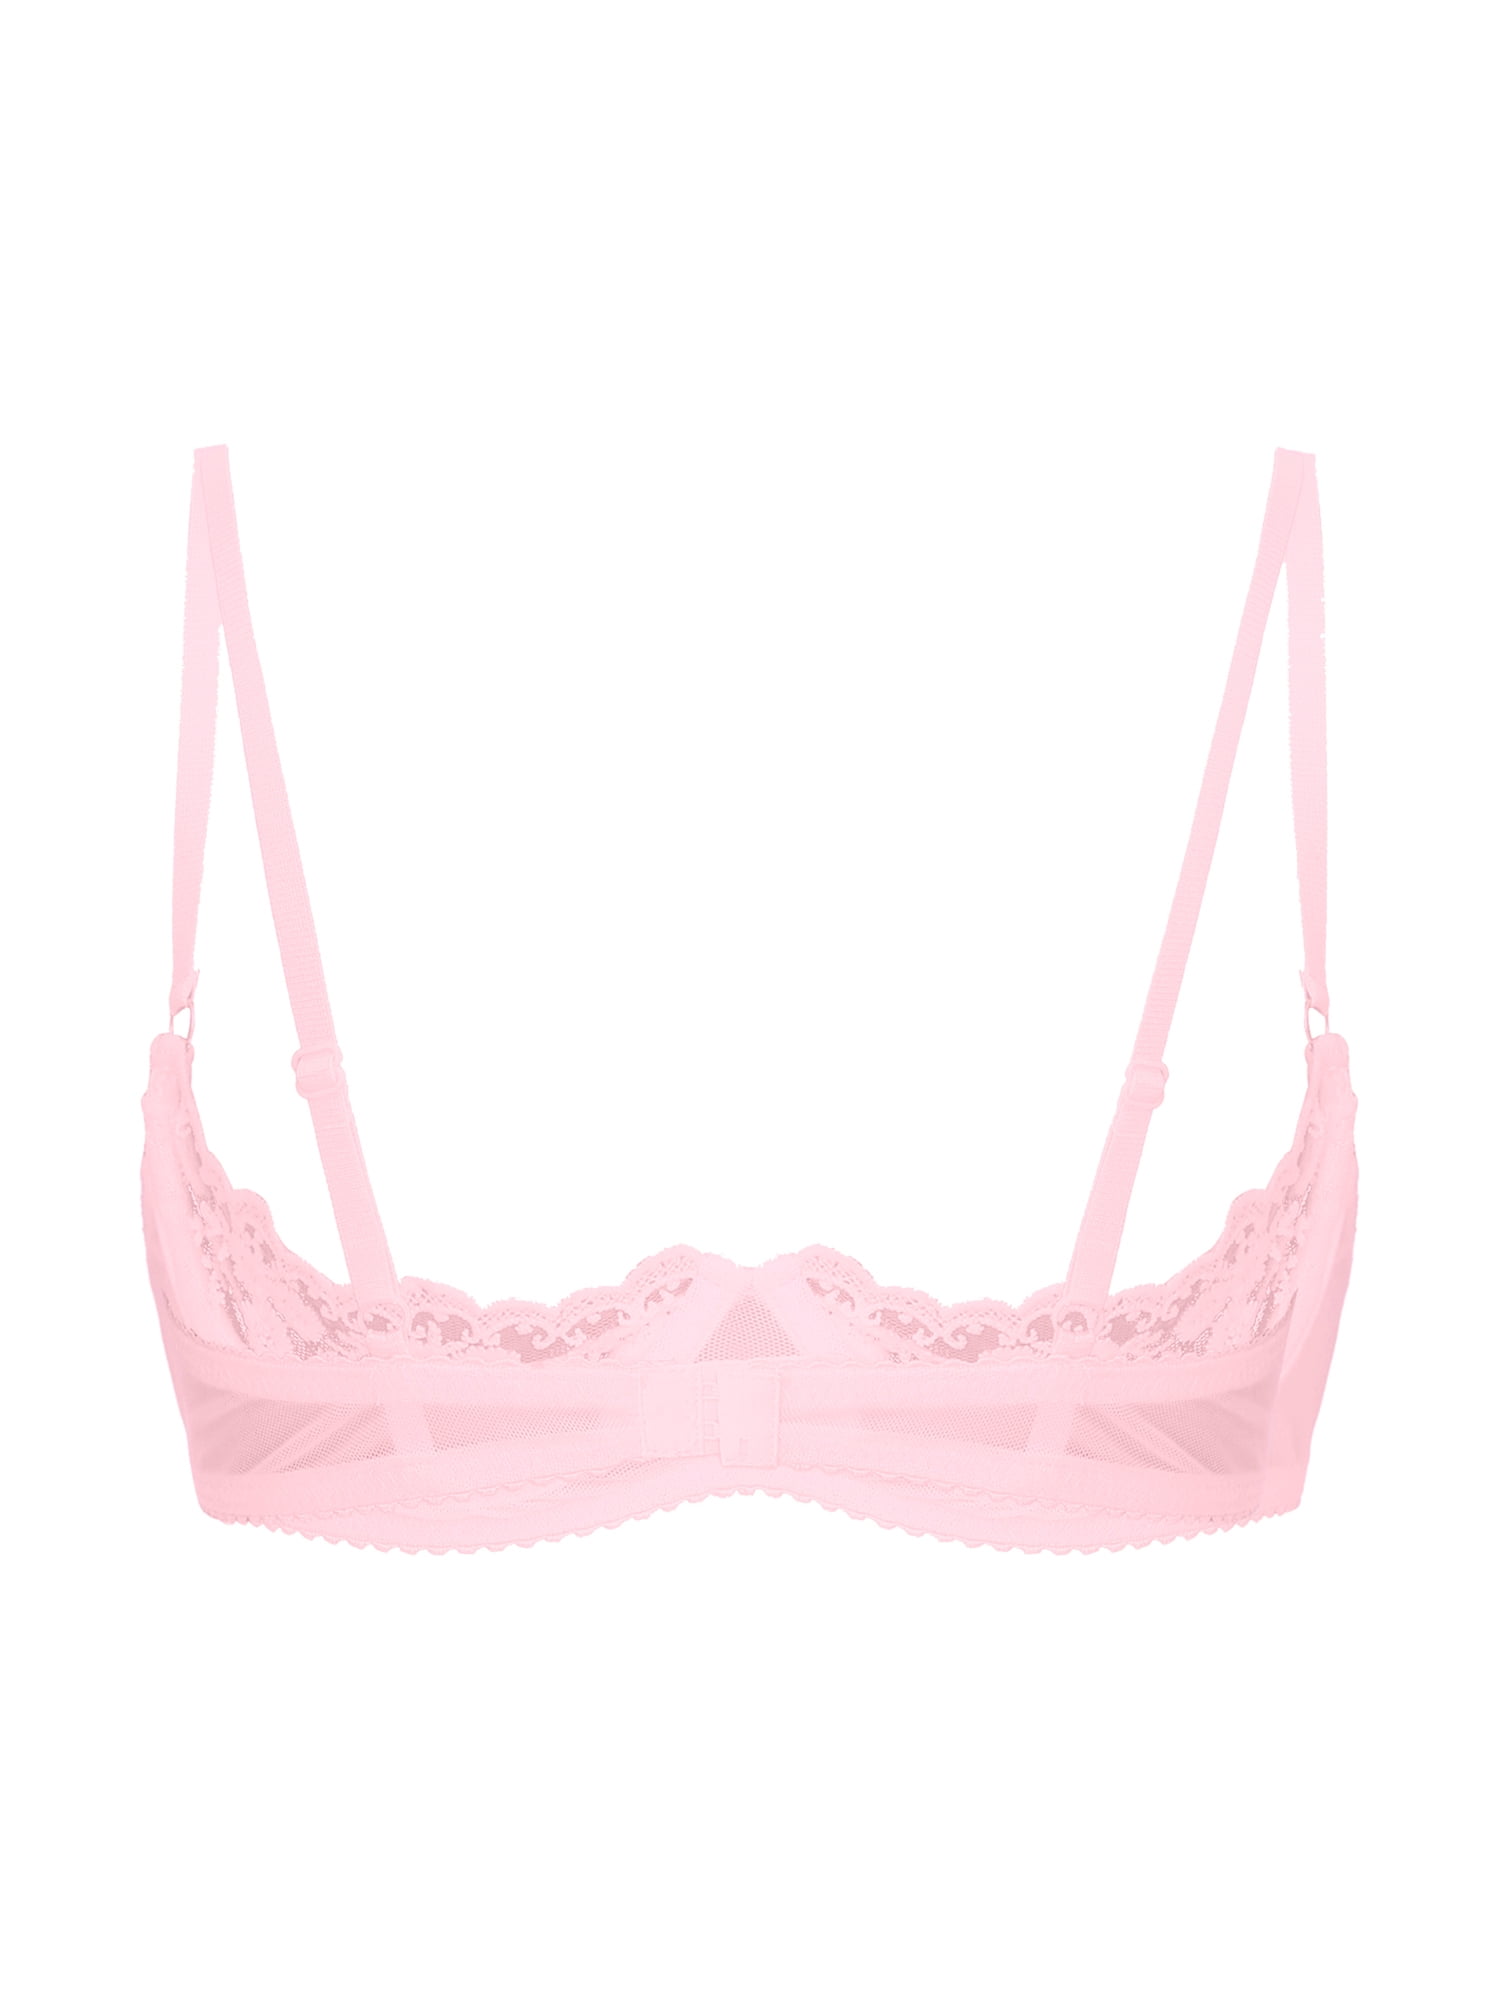 Plusform Pink Lace Instant Shaping Bra NWT 38DD Size undefined - $8 New  With Tags - From Jackie